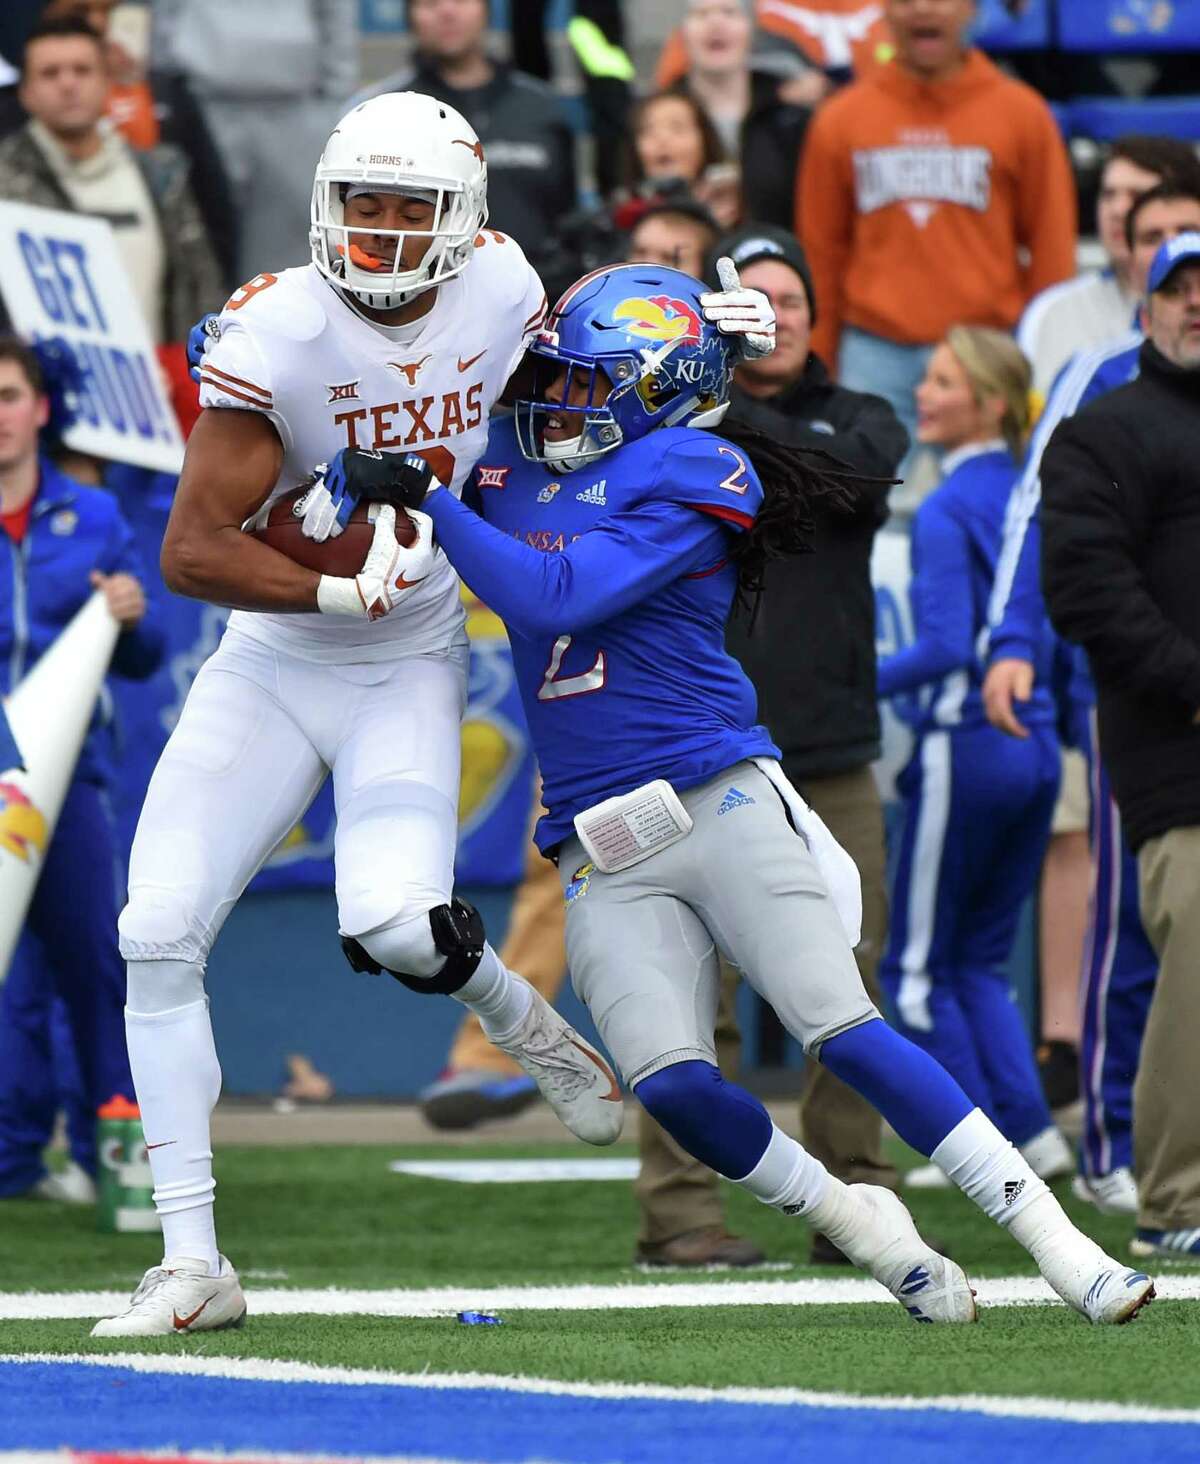 LAWRENCE, KANSAS - NOVEMBER 23: Wide receiver Collin Johnson #9 of the Texas Longhorns goes in for a touchdown against cornerback Corione Harris #2 of the Kansas Jayhawks in first quarter at Memorial Stadium on November 23, 2018 in Lawrence, Kansas.